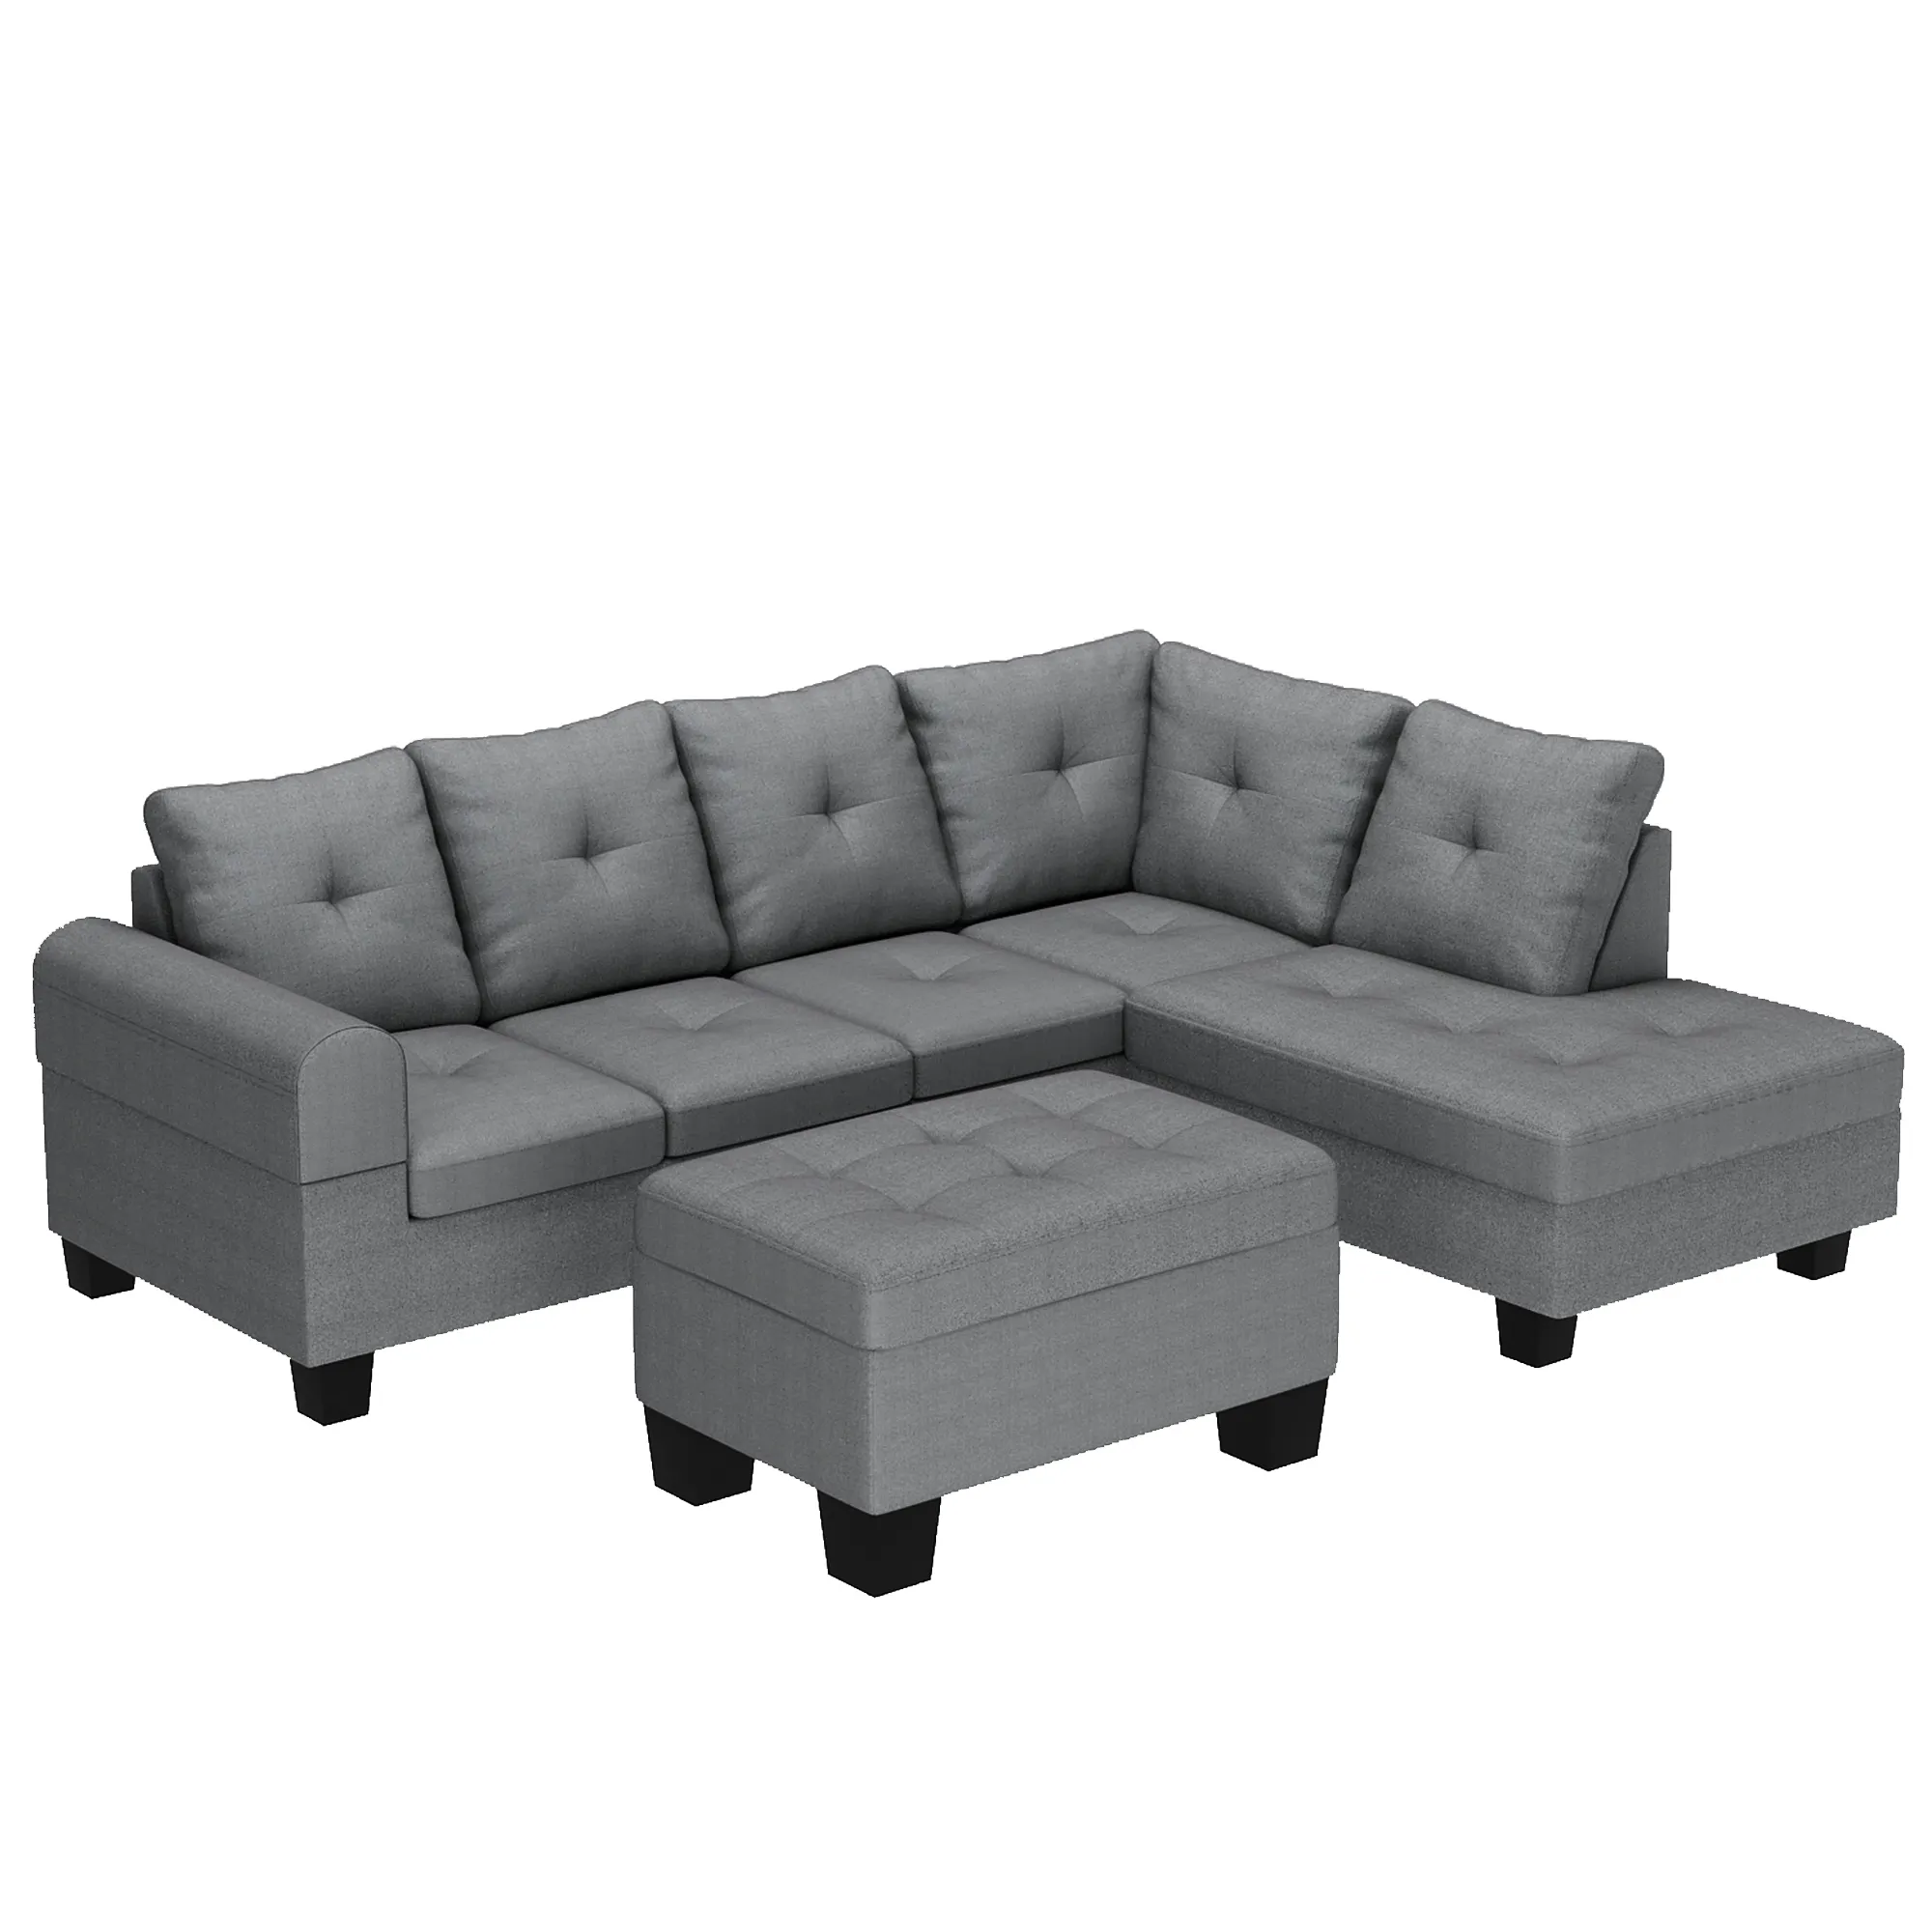 Factory Directly Sale L-Shape Modular Sofa Fabric Sectional Couch for Living Room Sofas Set Home Furniture